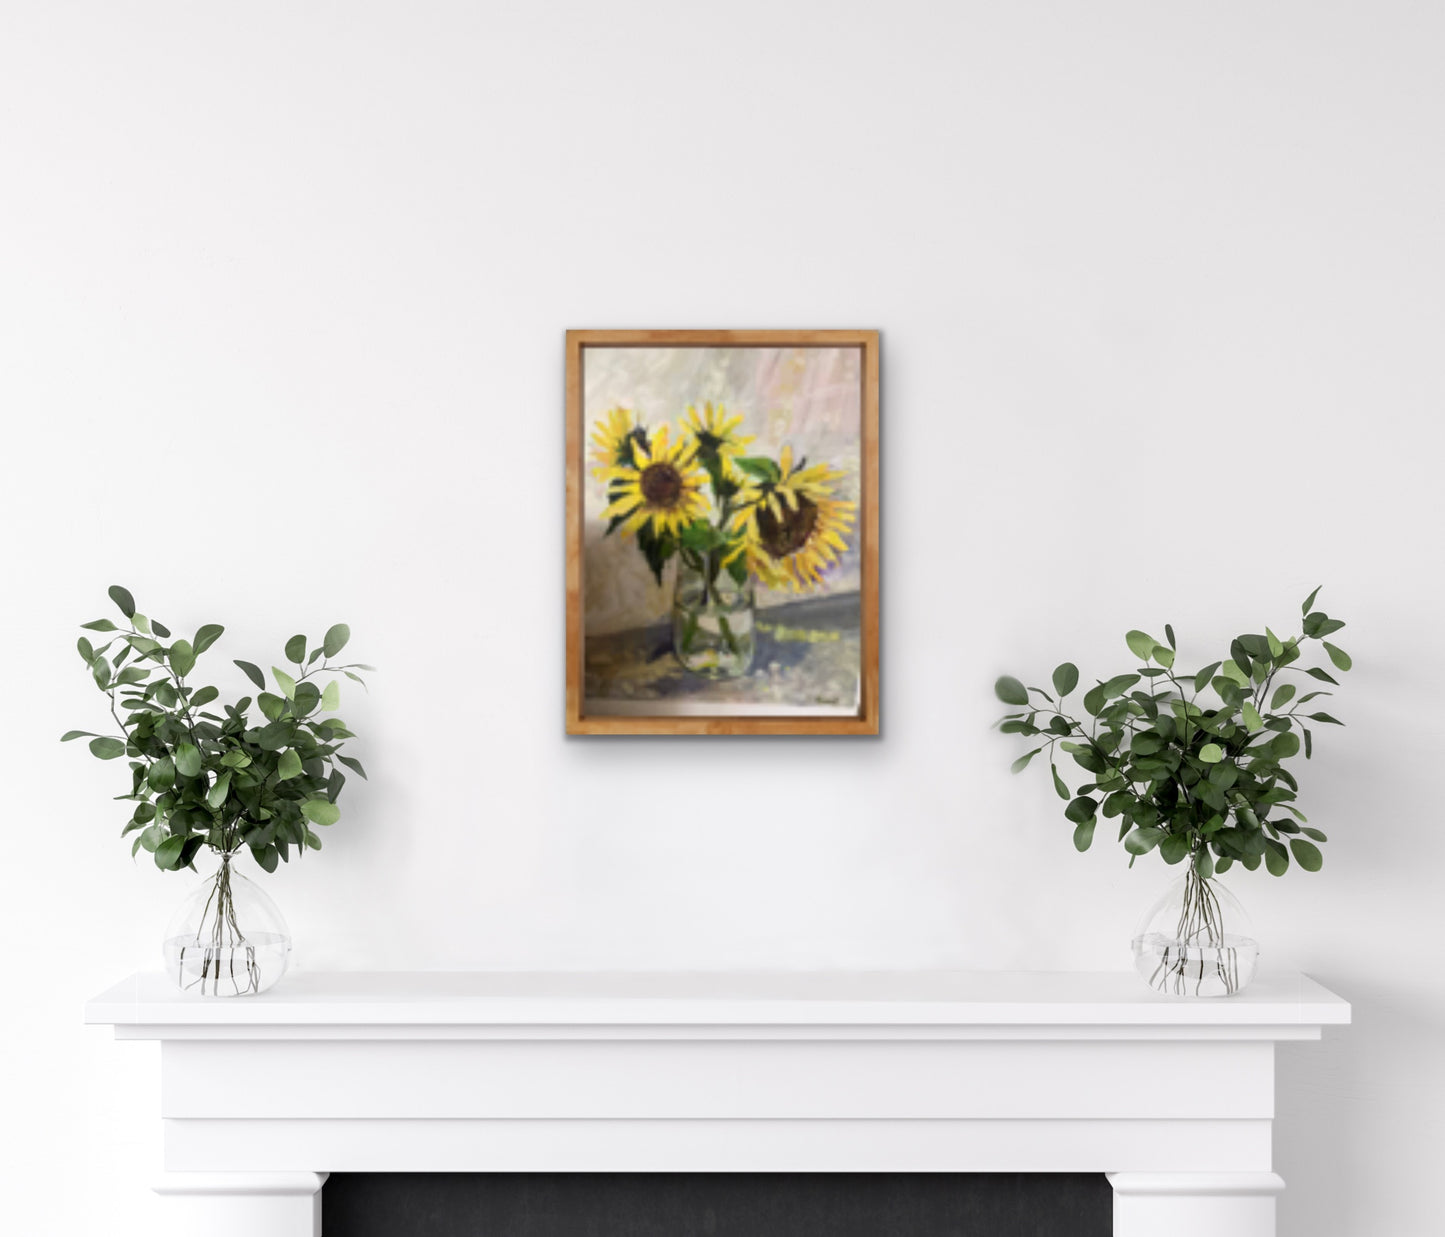 Sunflowers in the White Room